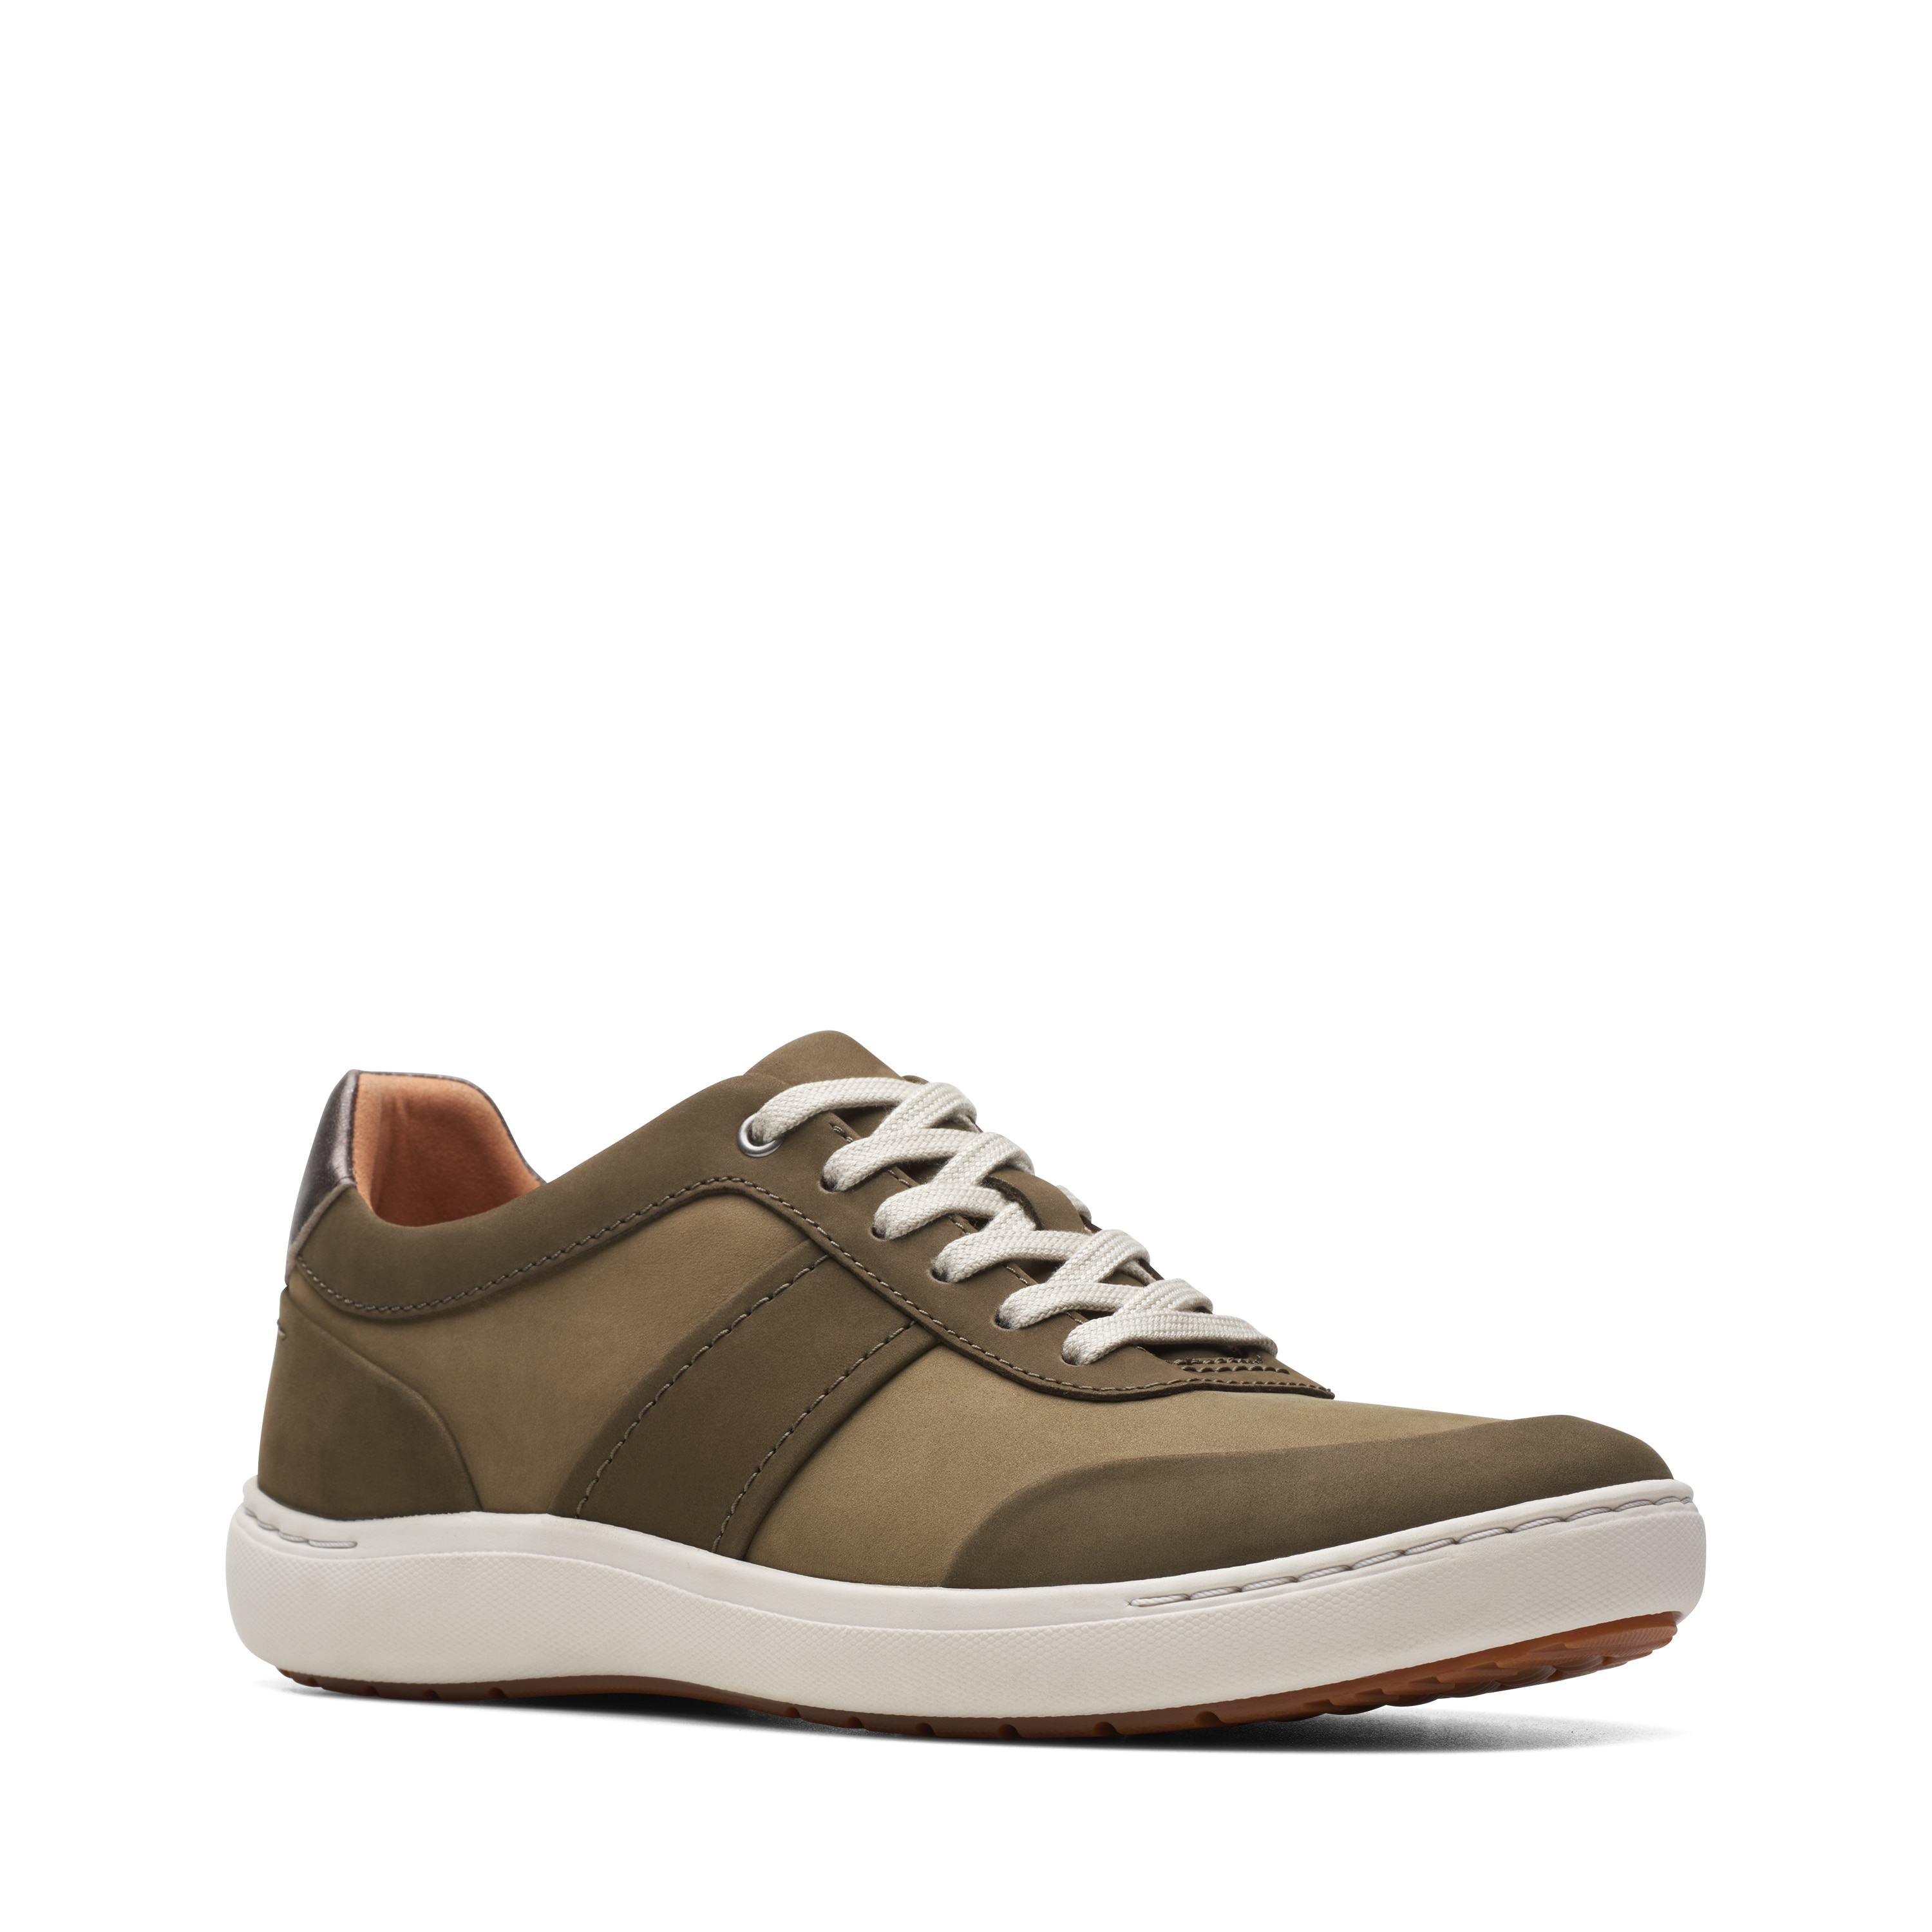 Clothing & Shoes - Shoes - Sneakers - Clarks Nalle Fern Sneaker